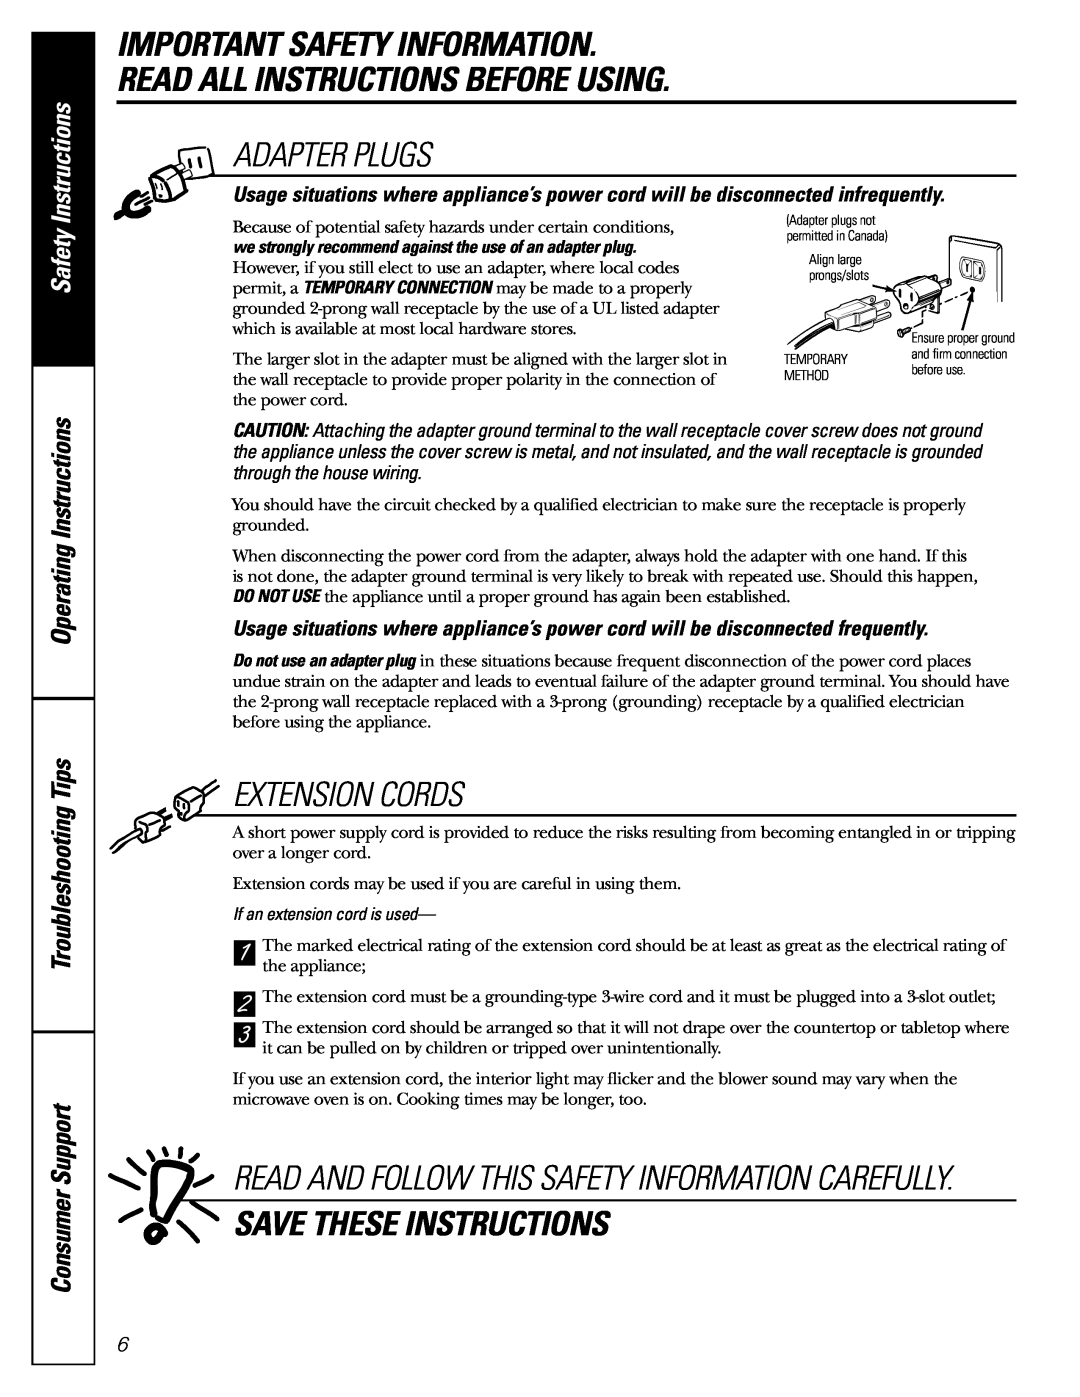 GE JE2160 owner manual Important Safety Information Read All Instructions Before Using, Adapter Plugs, Extension Cords 